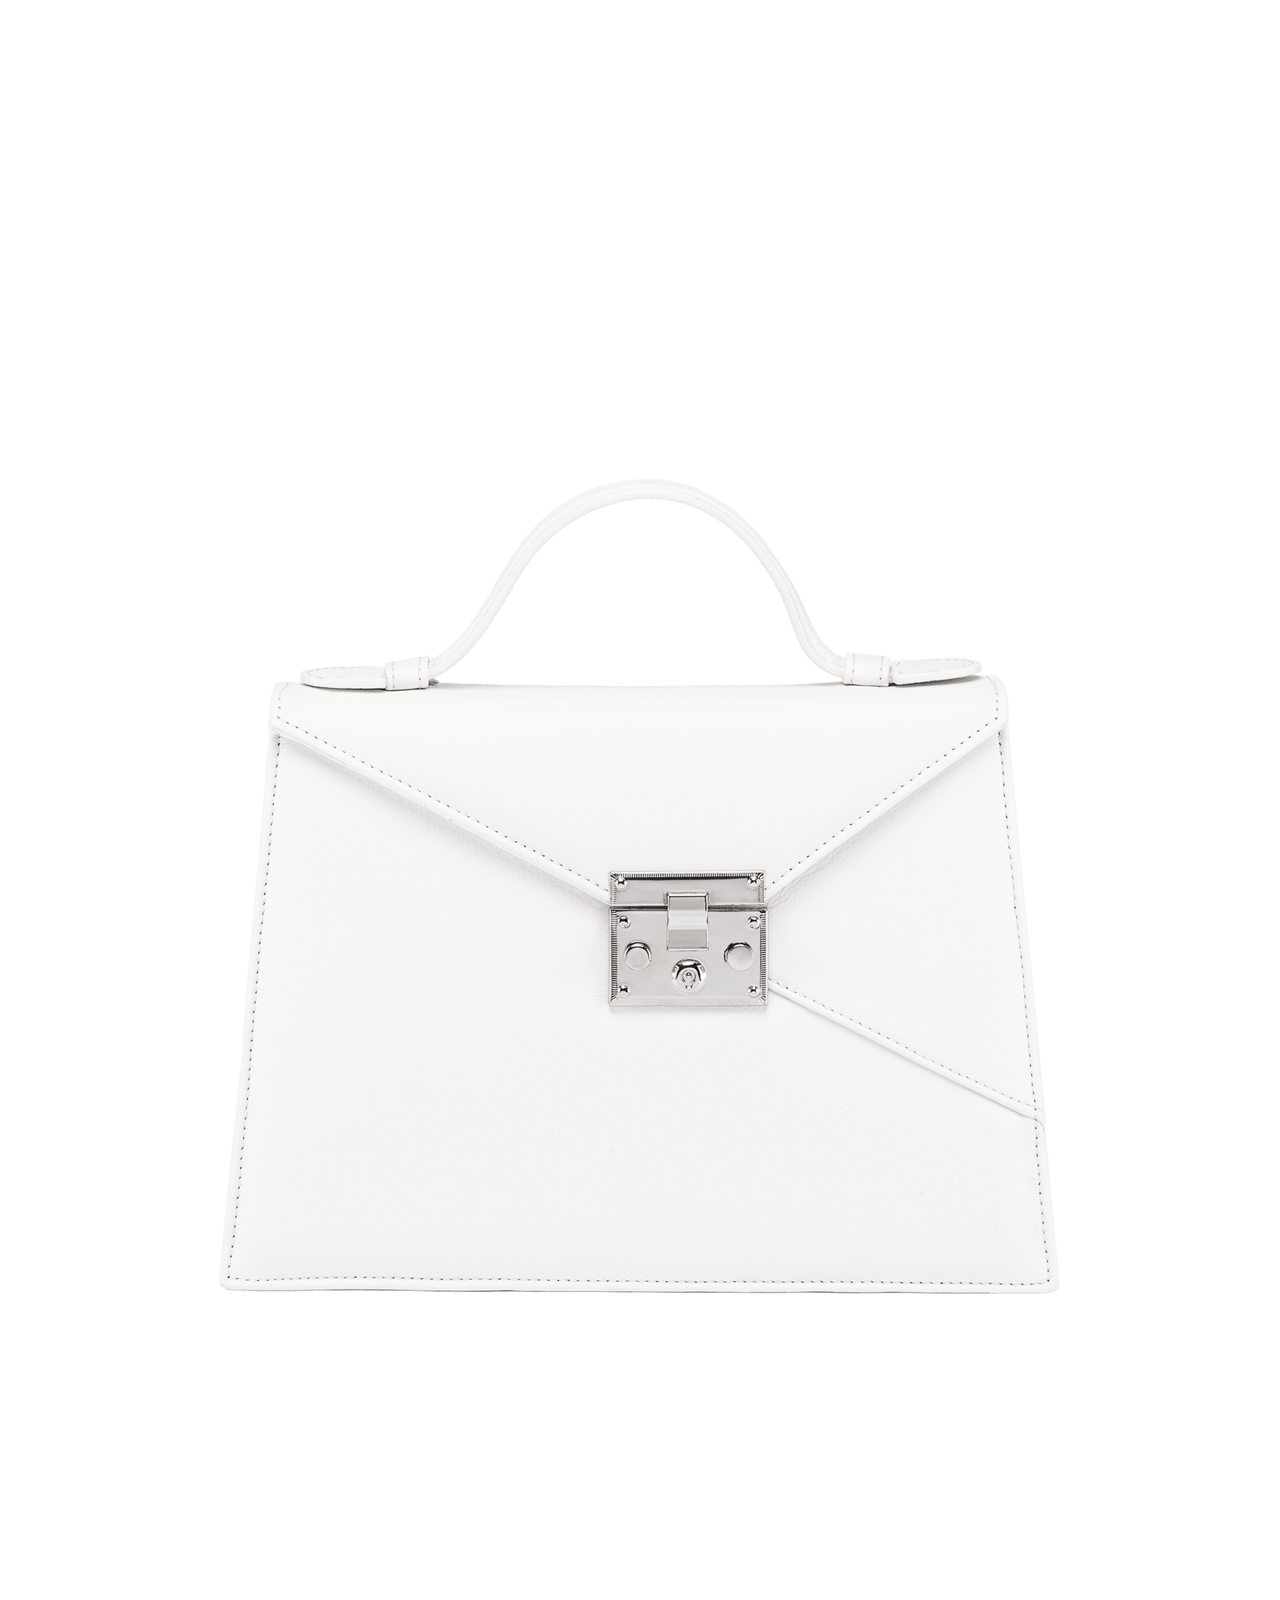 Louis Diner Tote in White